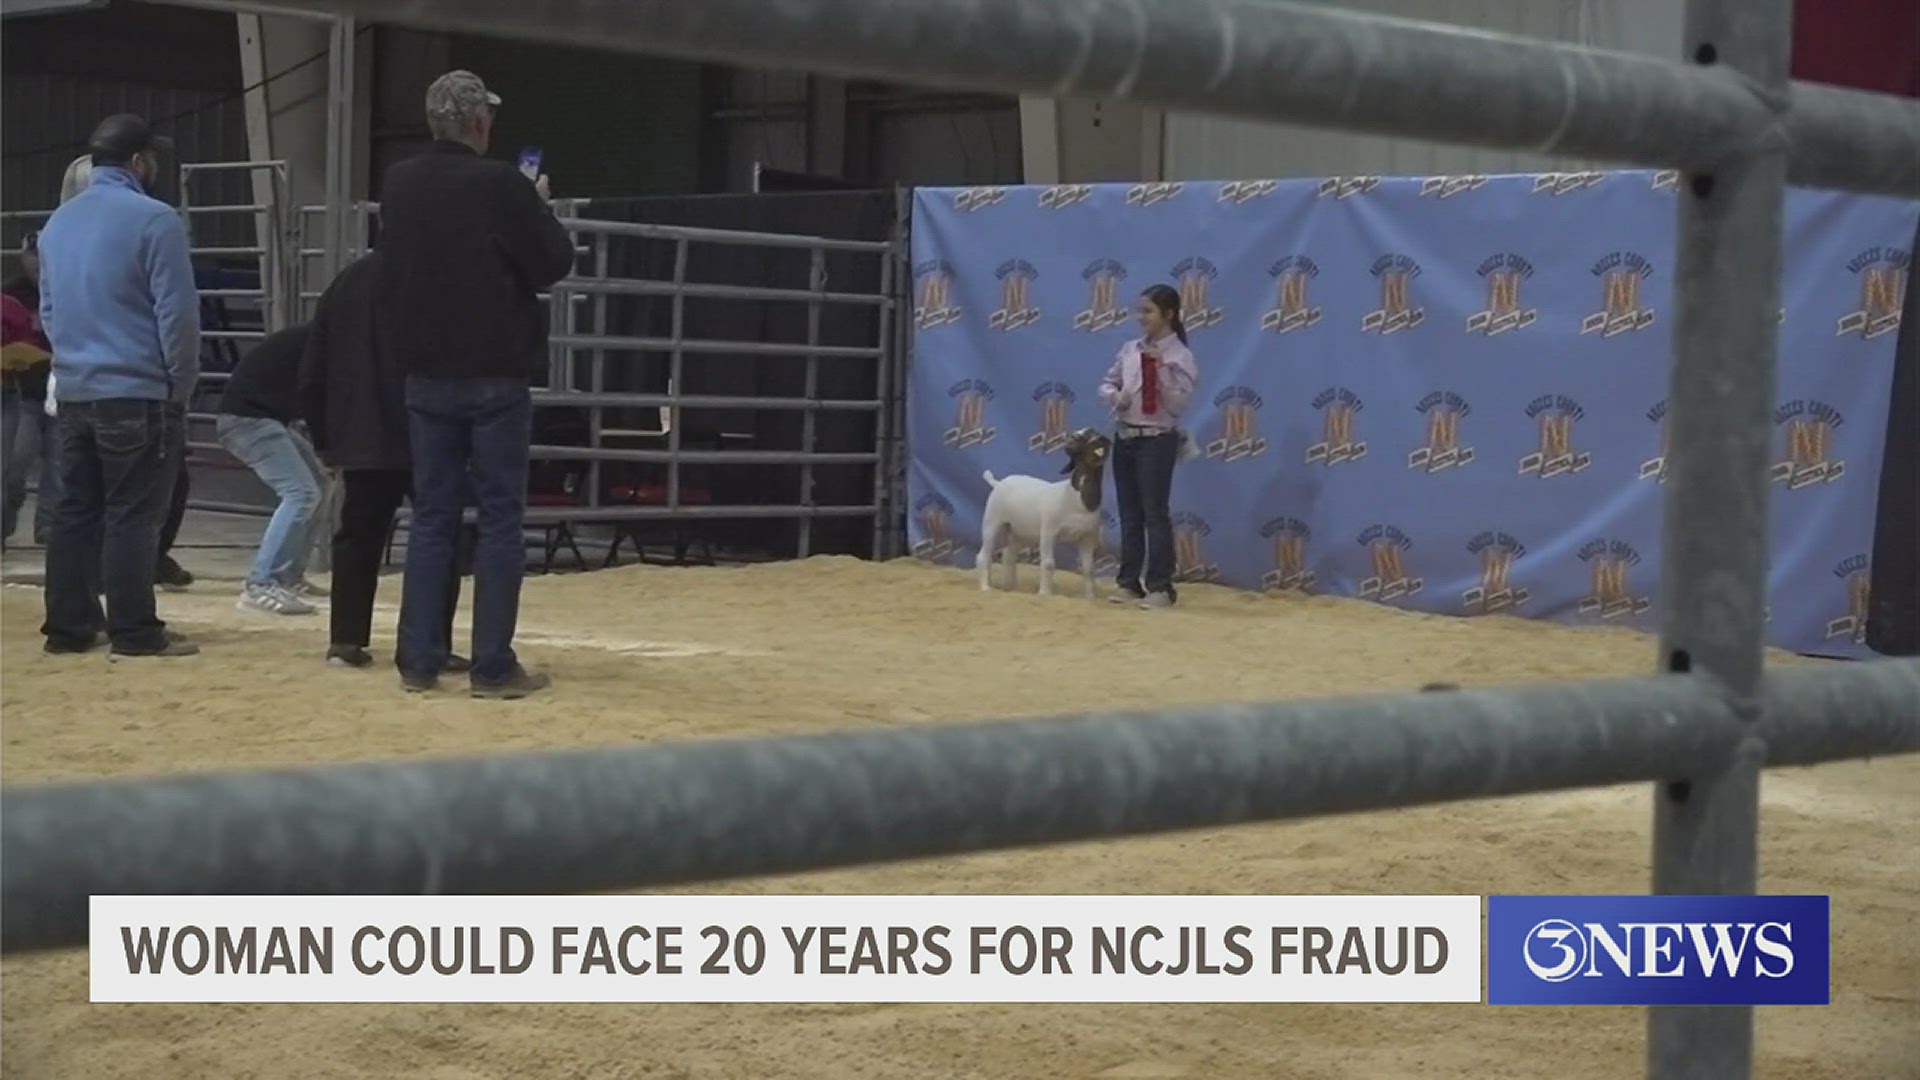 Sara Rene Chapman, 67, pleaded guilty to one count of wire fraud as part of an apparent scheme to defraud the Nueces County Junior Livestock Show.